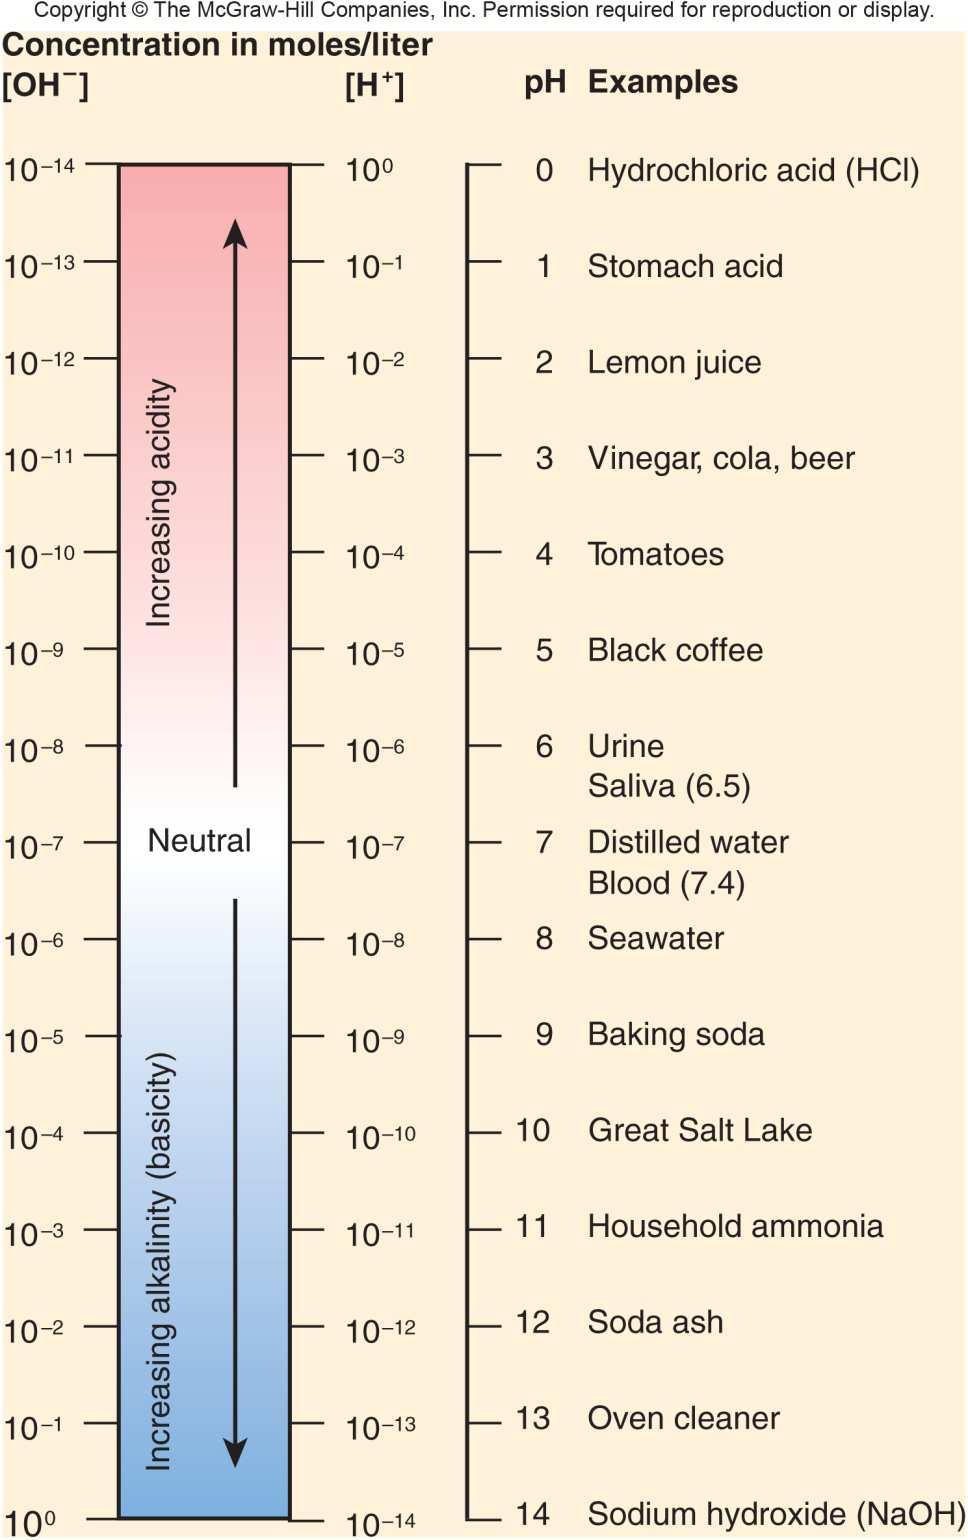 ph Scale ph: potential of Hydrogen -logarithmic expression of amount of H + in solutions: -log10 [H + ] Log scale = 10 fold change ph calculated as log10 [H + ] in moles/liter (scale 0-14) 13 The ph